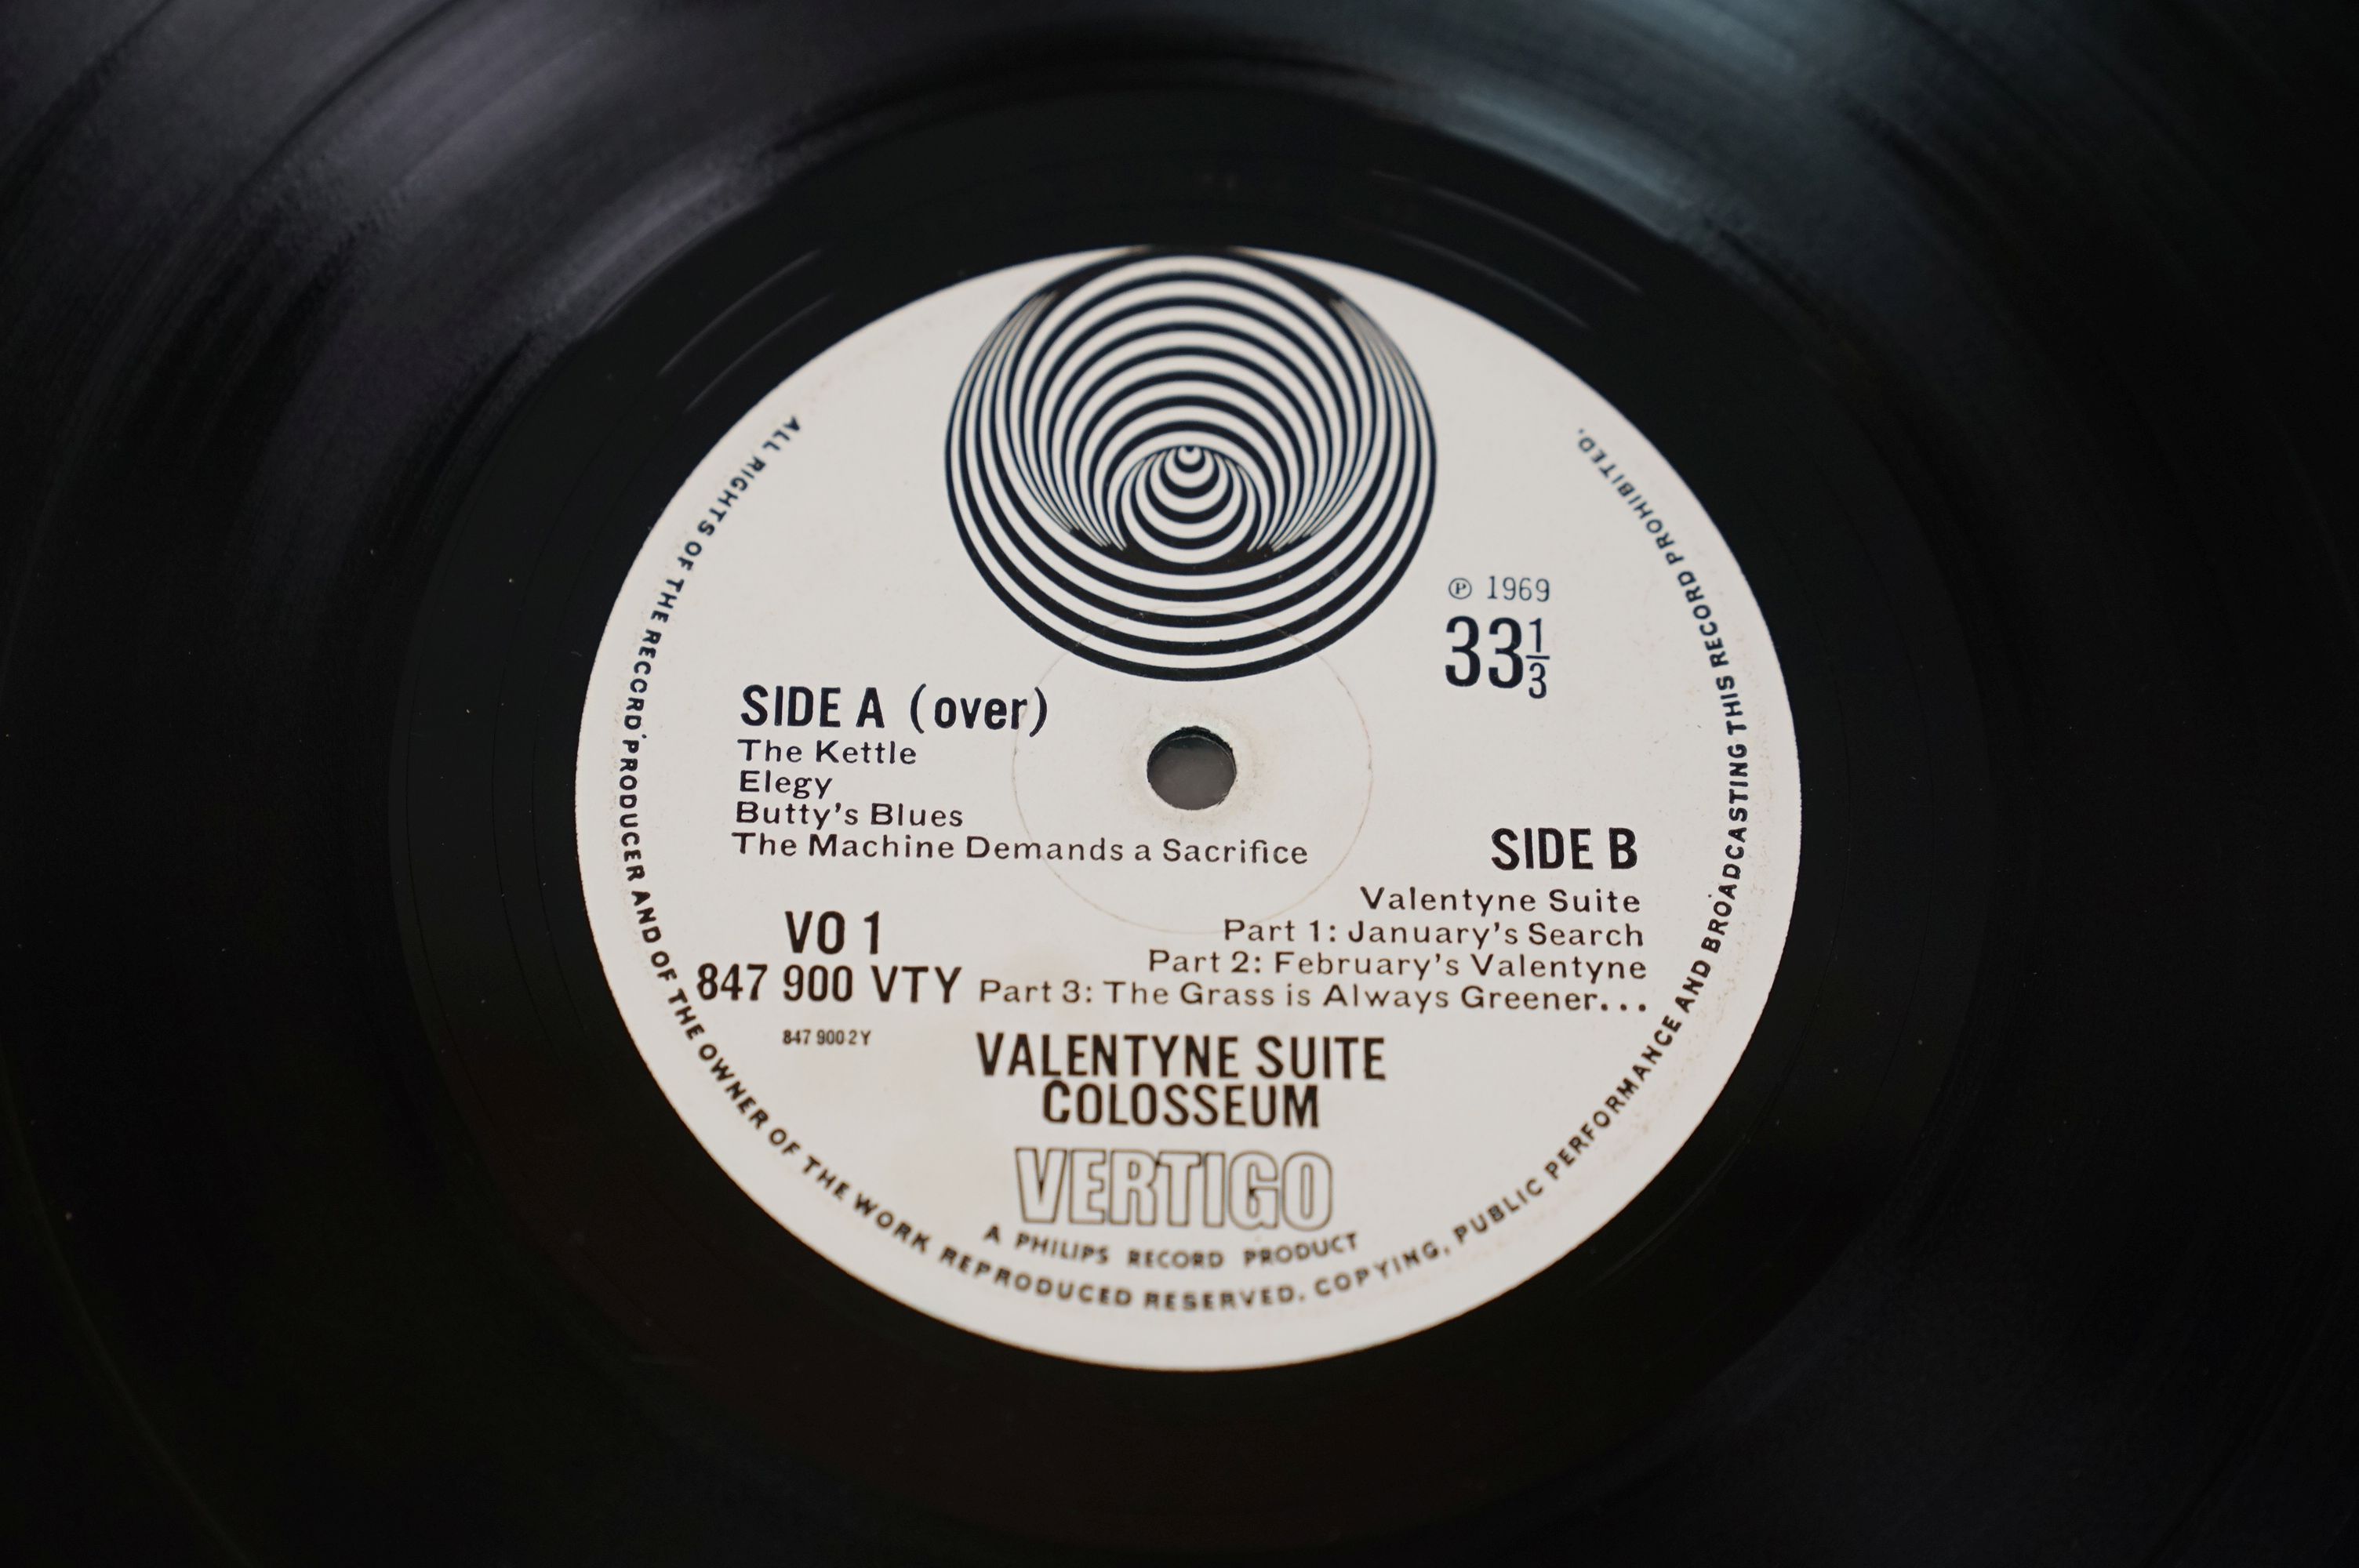 Vinyl - Colosseum Valentyne Suite (VO 1) First press large swirl label with A Philips Record - Image 9 of 9